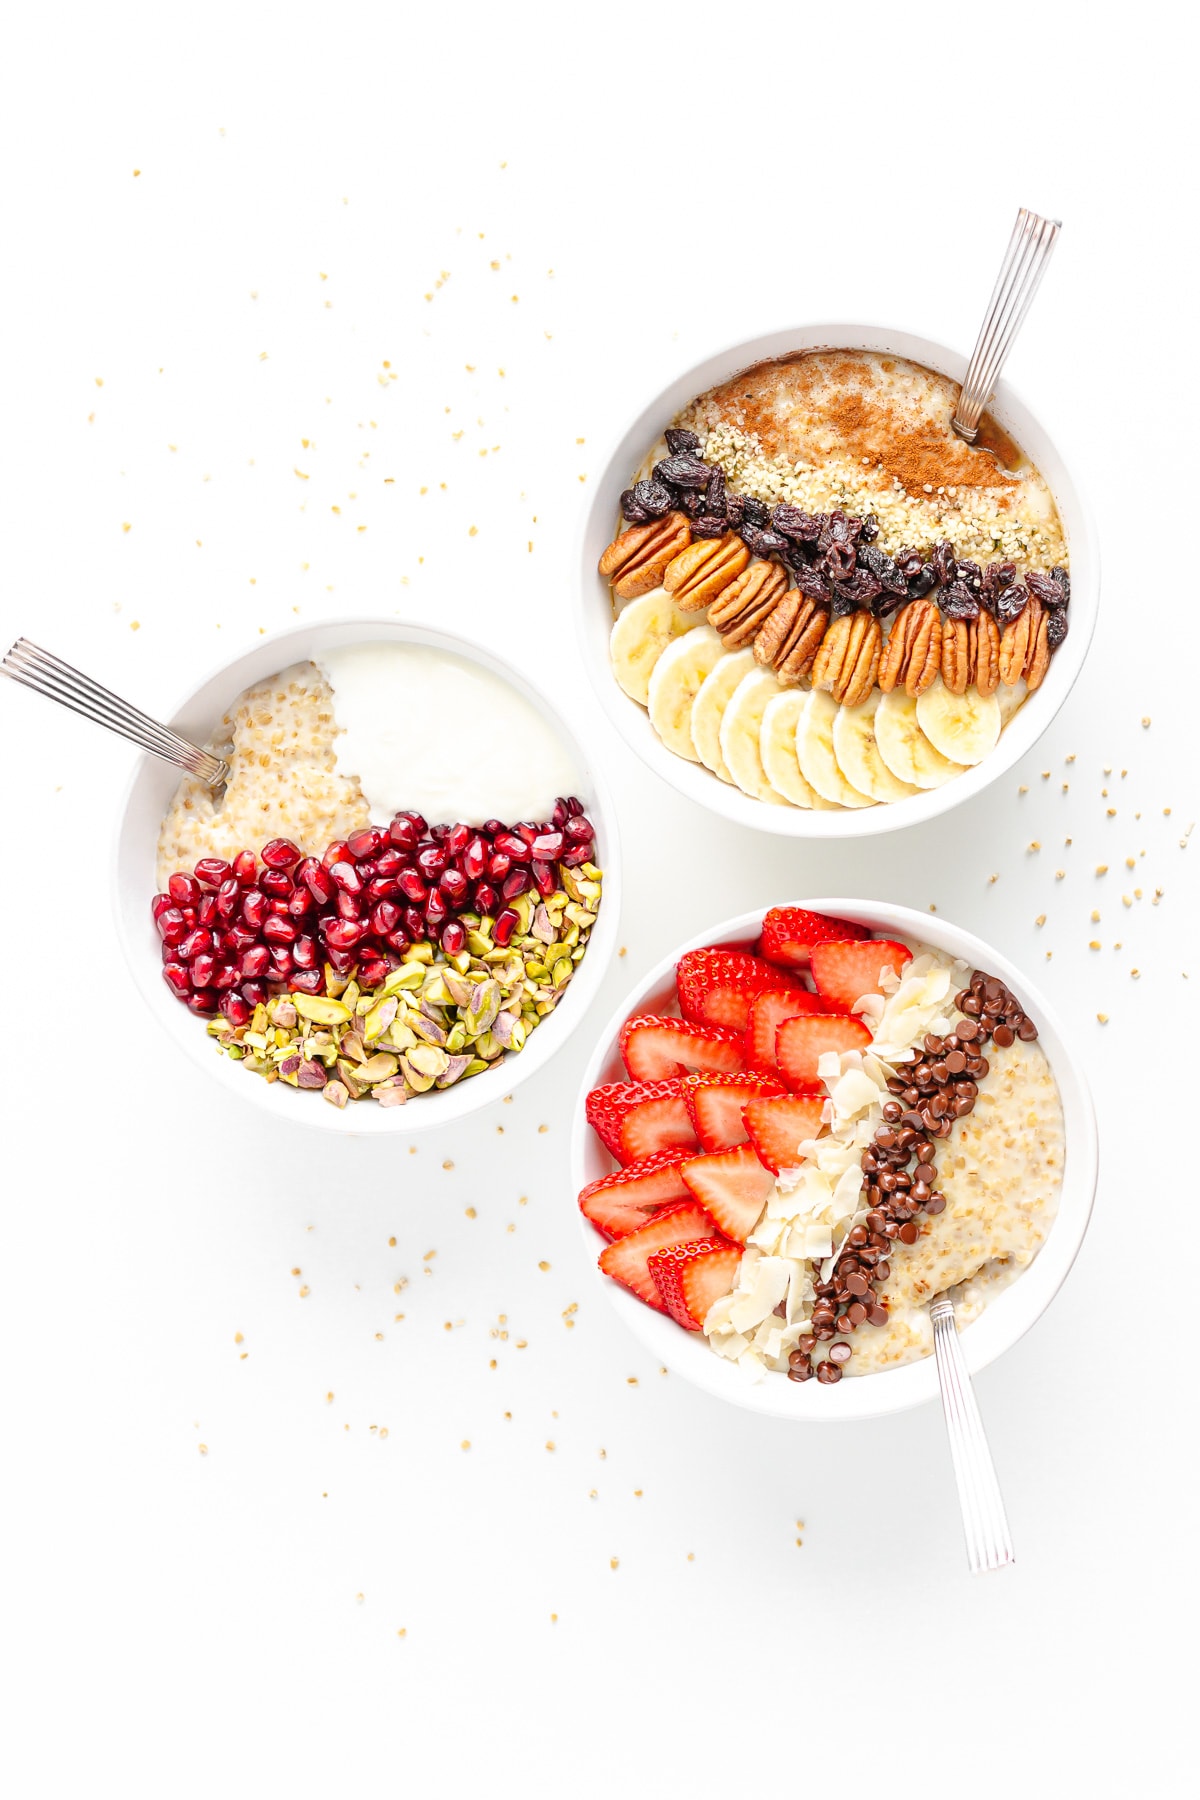 Three bowls of steel cut oatmeal with different toppings on a white background scattered with steel cut oats.